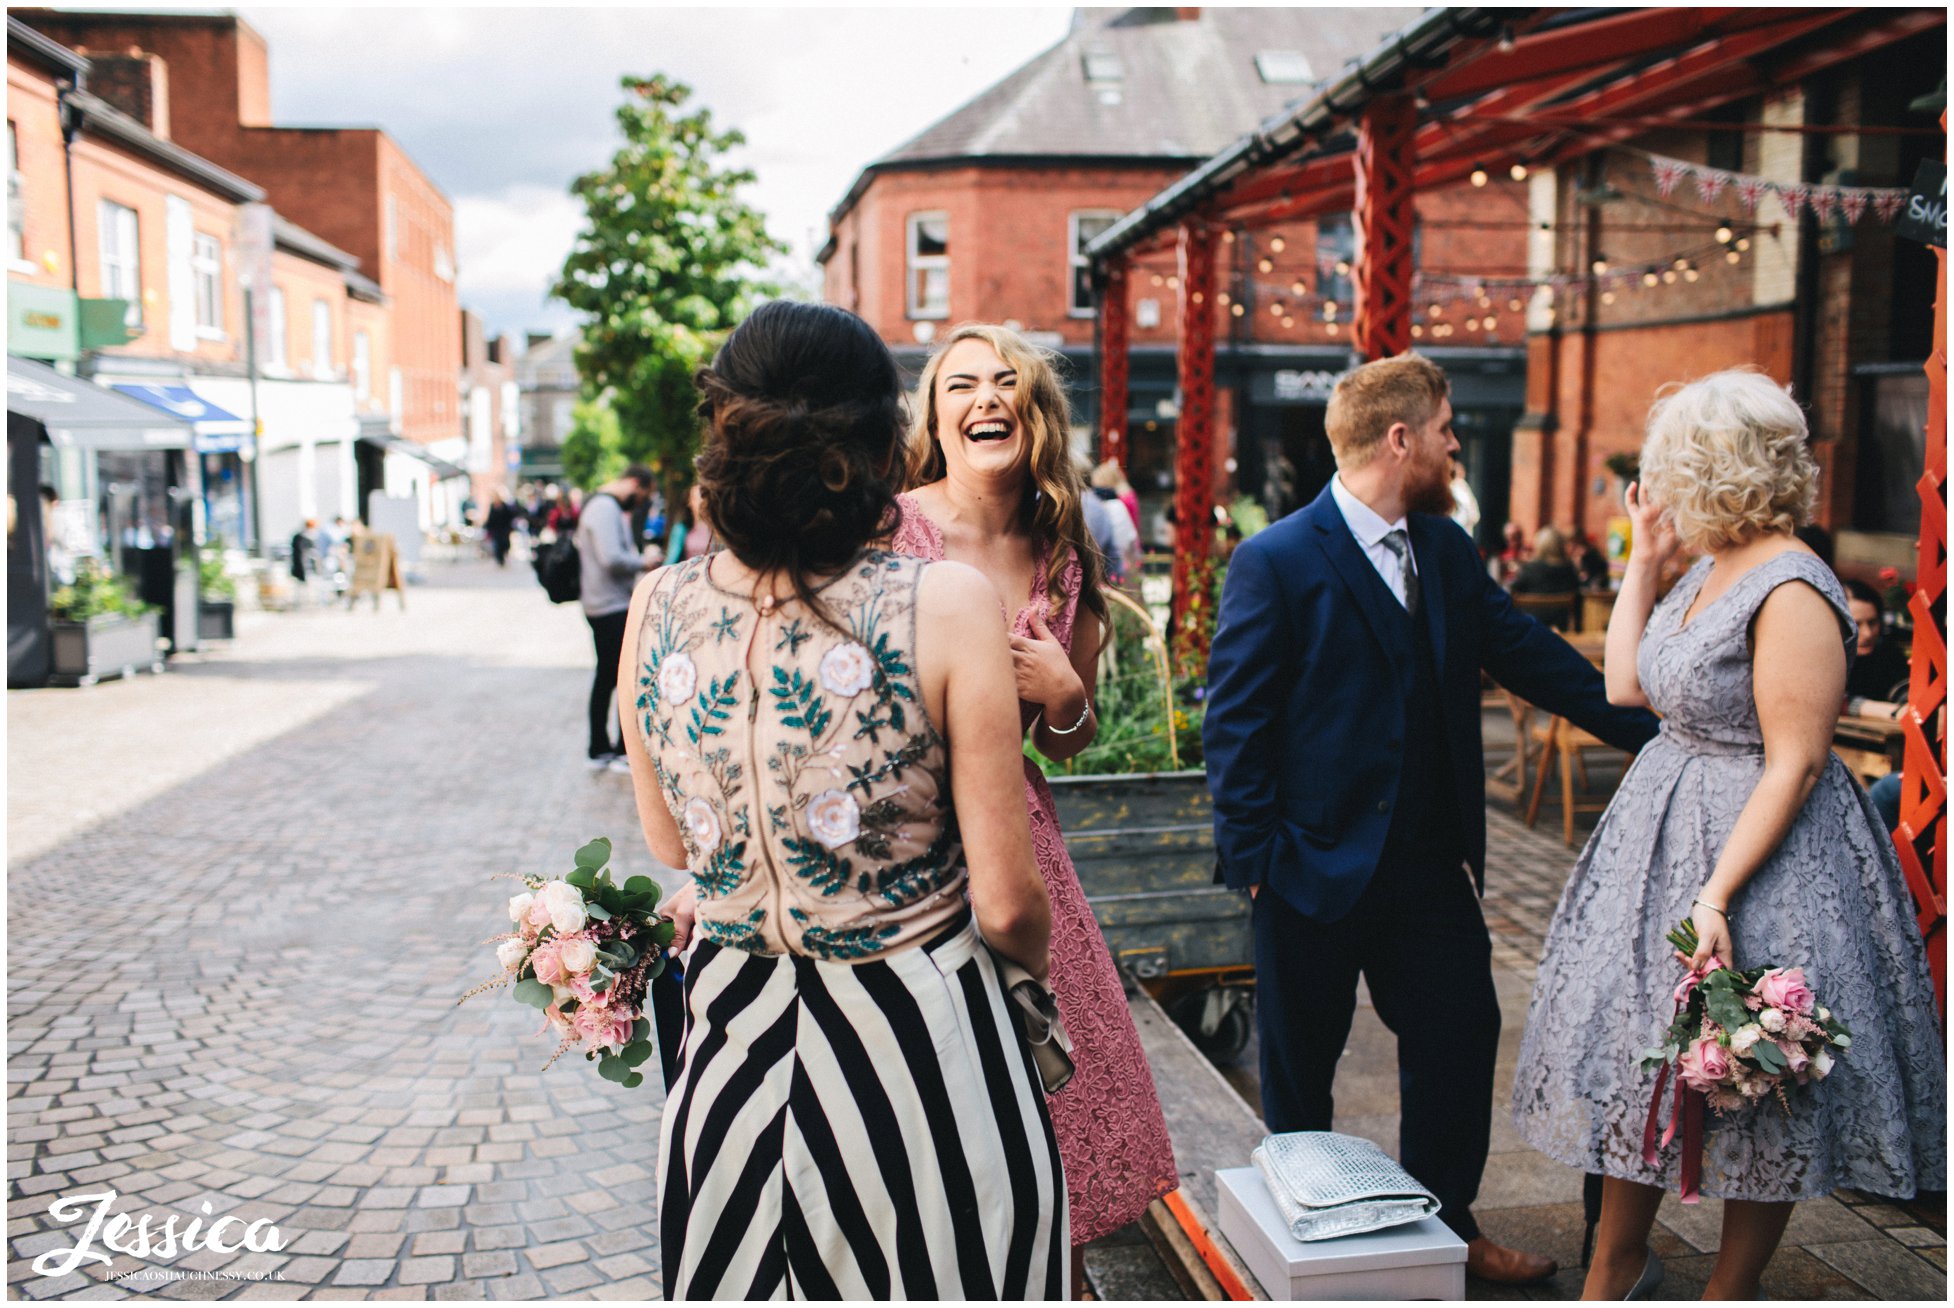 bridesmaid laughs with friends before the wedding ceremony